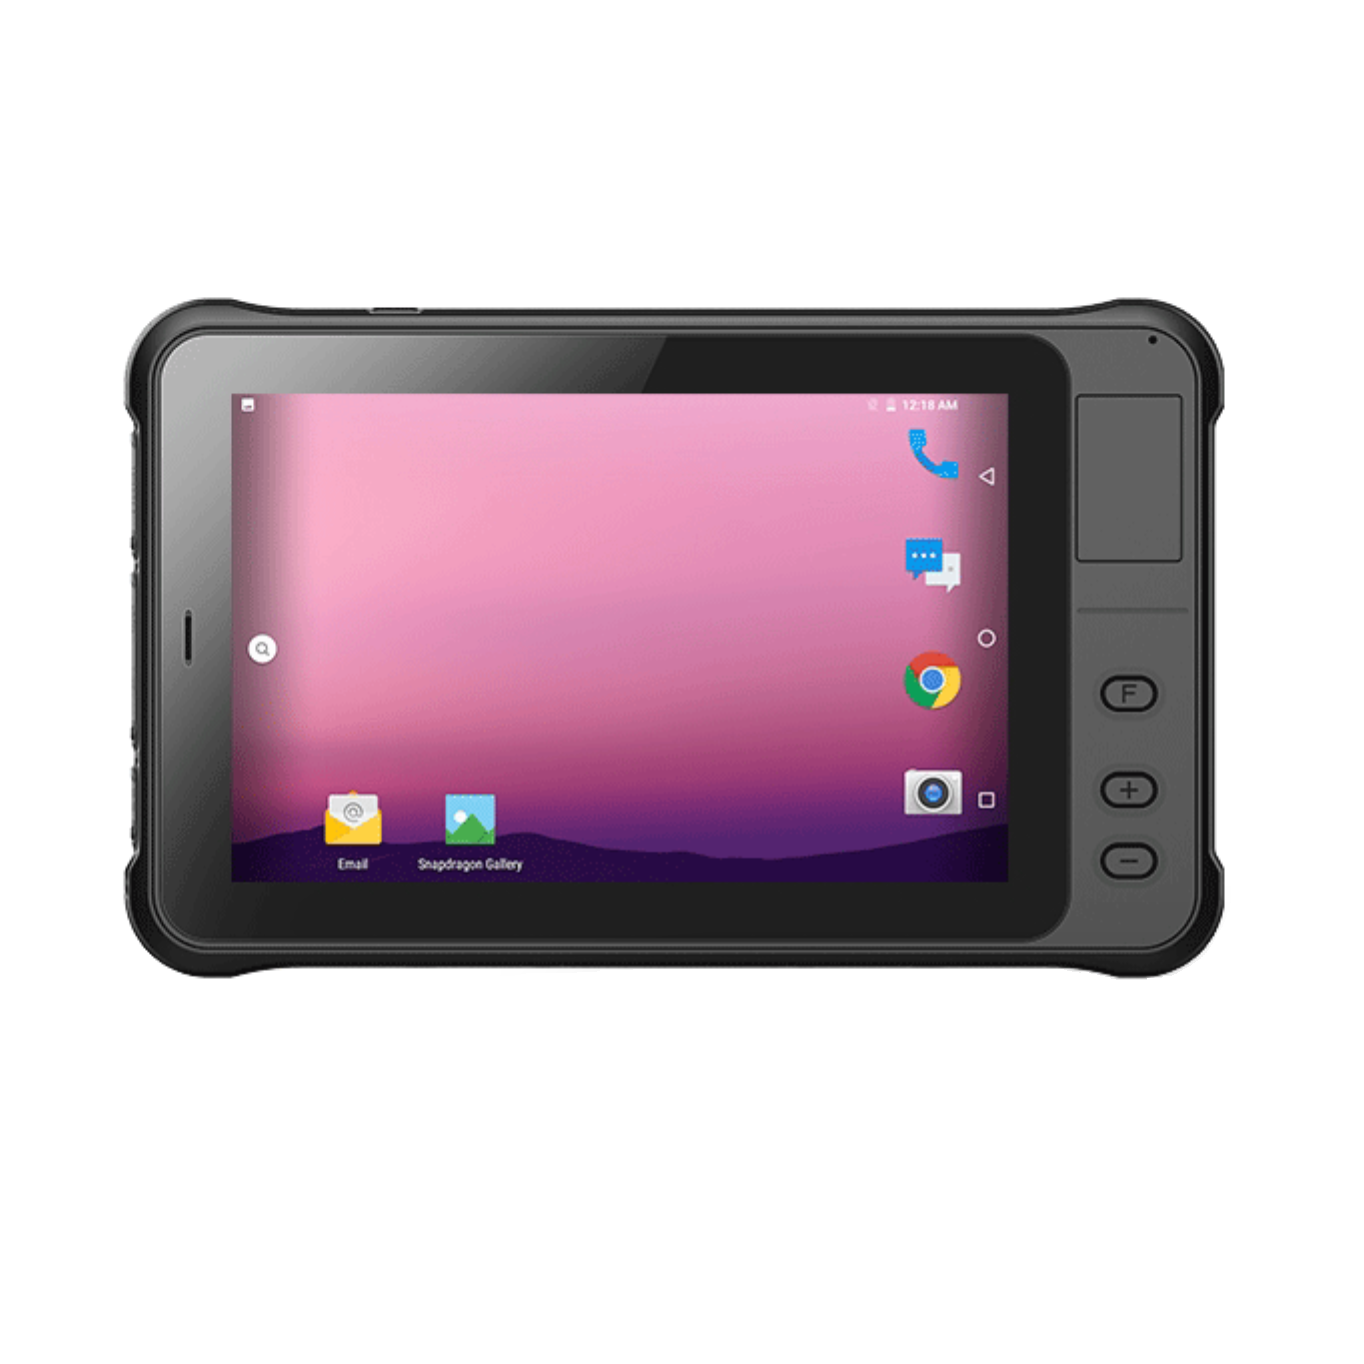 Hot sale Iot Reverse Ssh - 7 Inch Android In-Vehicle Rugged Tablet – Riyexian